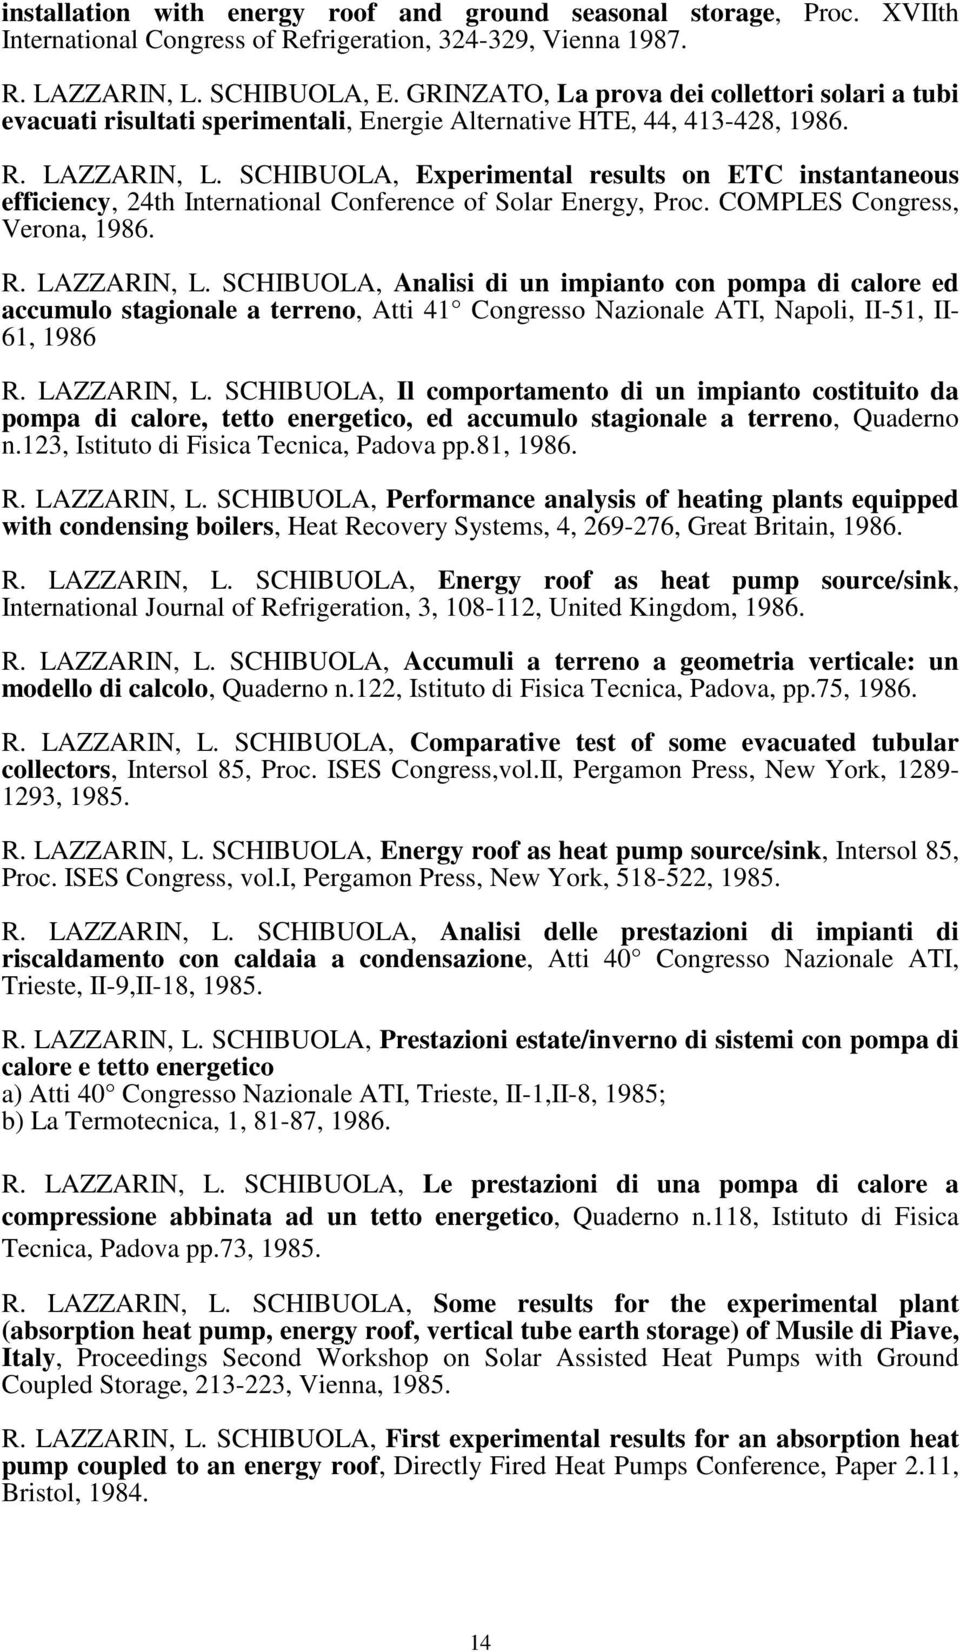 SCHIBUOLA, Experimental results on ETC instantaneous efficiency, 24th International Conference of Solar Energy, Proc. COMPLES Congress, Verona, 1986. R. LAZZARIN, L.